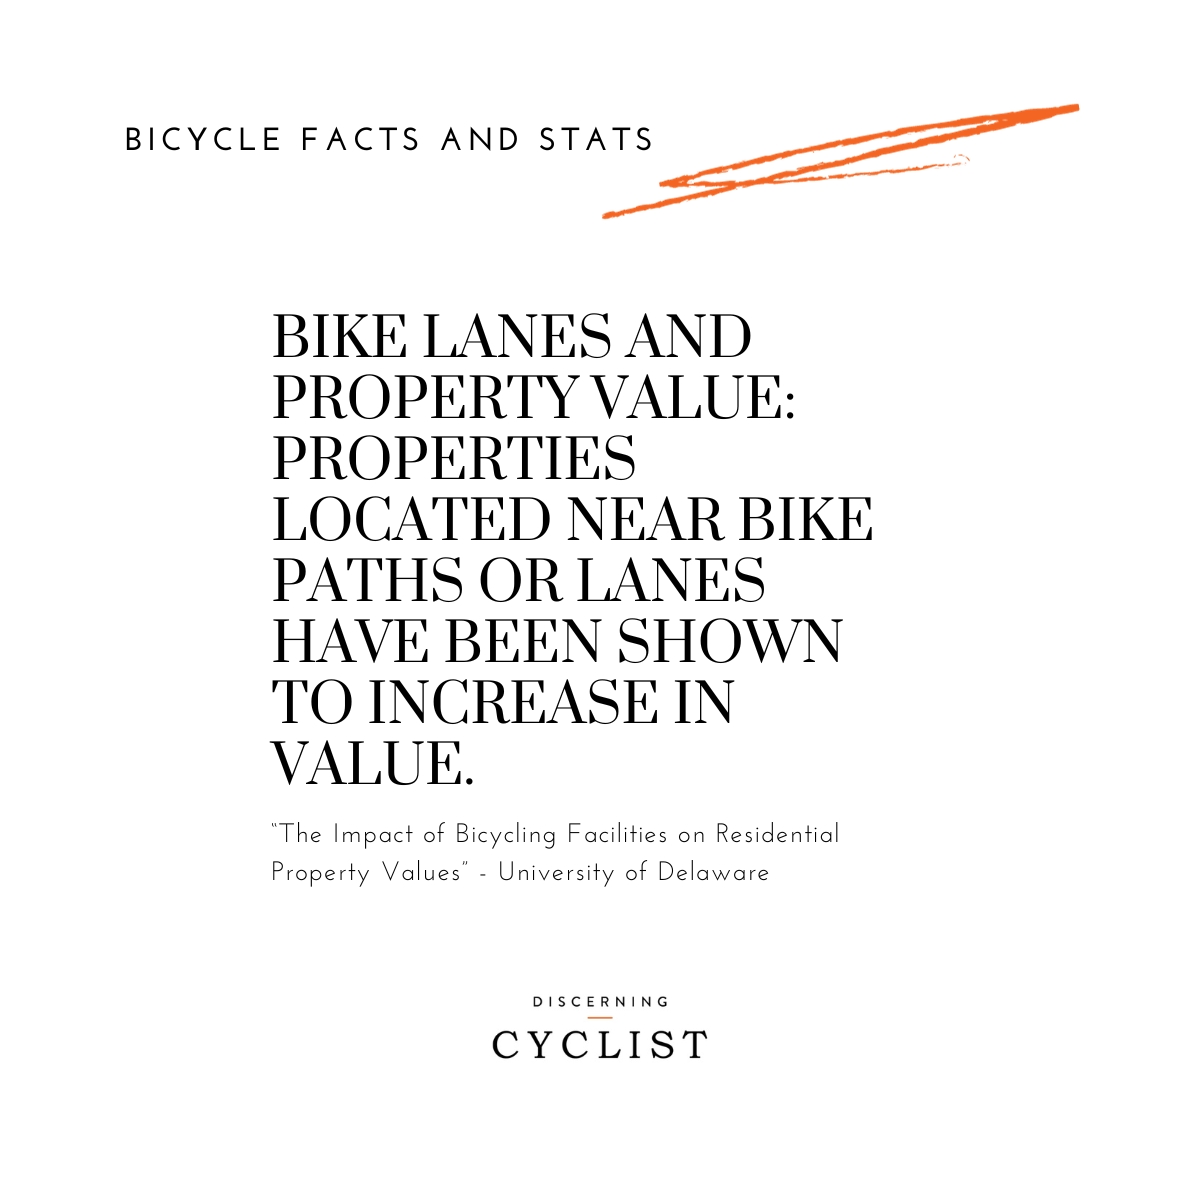 Bike Lanes and Property Value: Properties located near bike paths or lanes have been shown to increase in value.